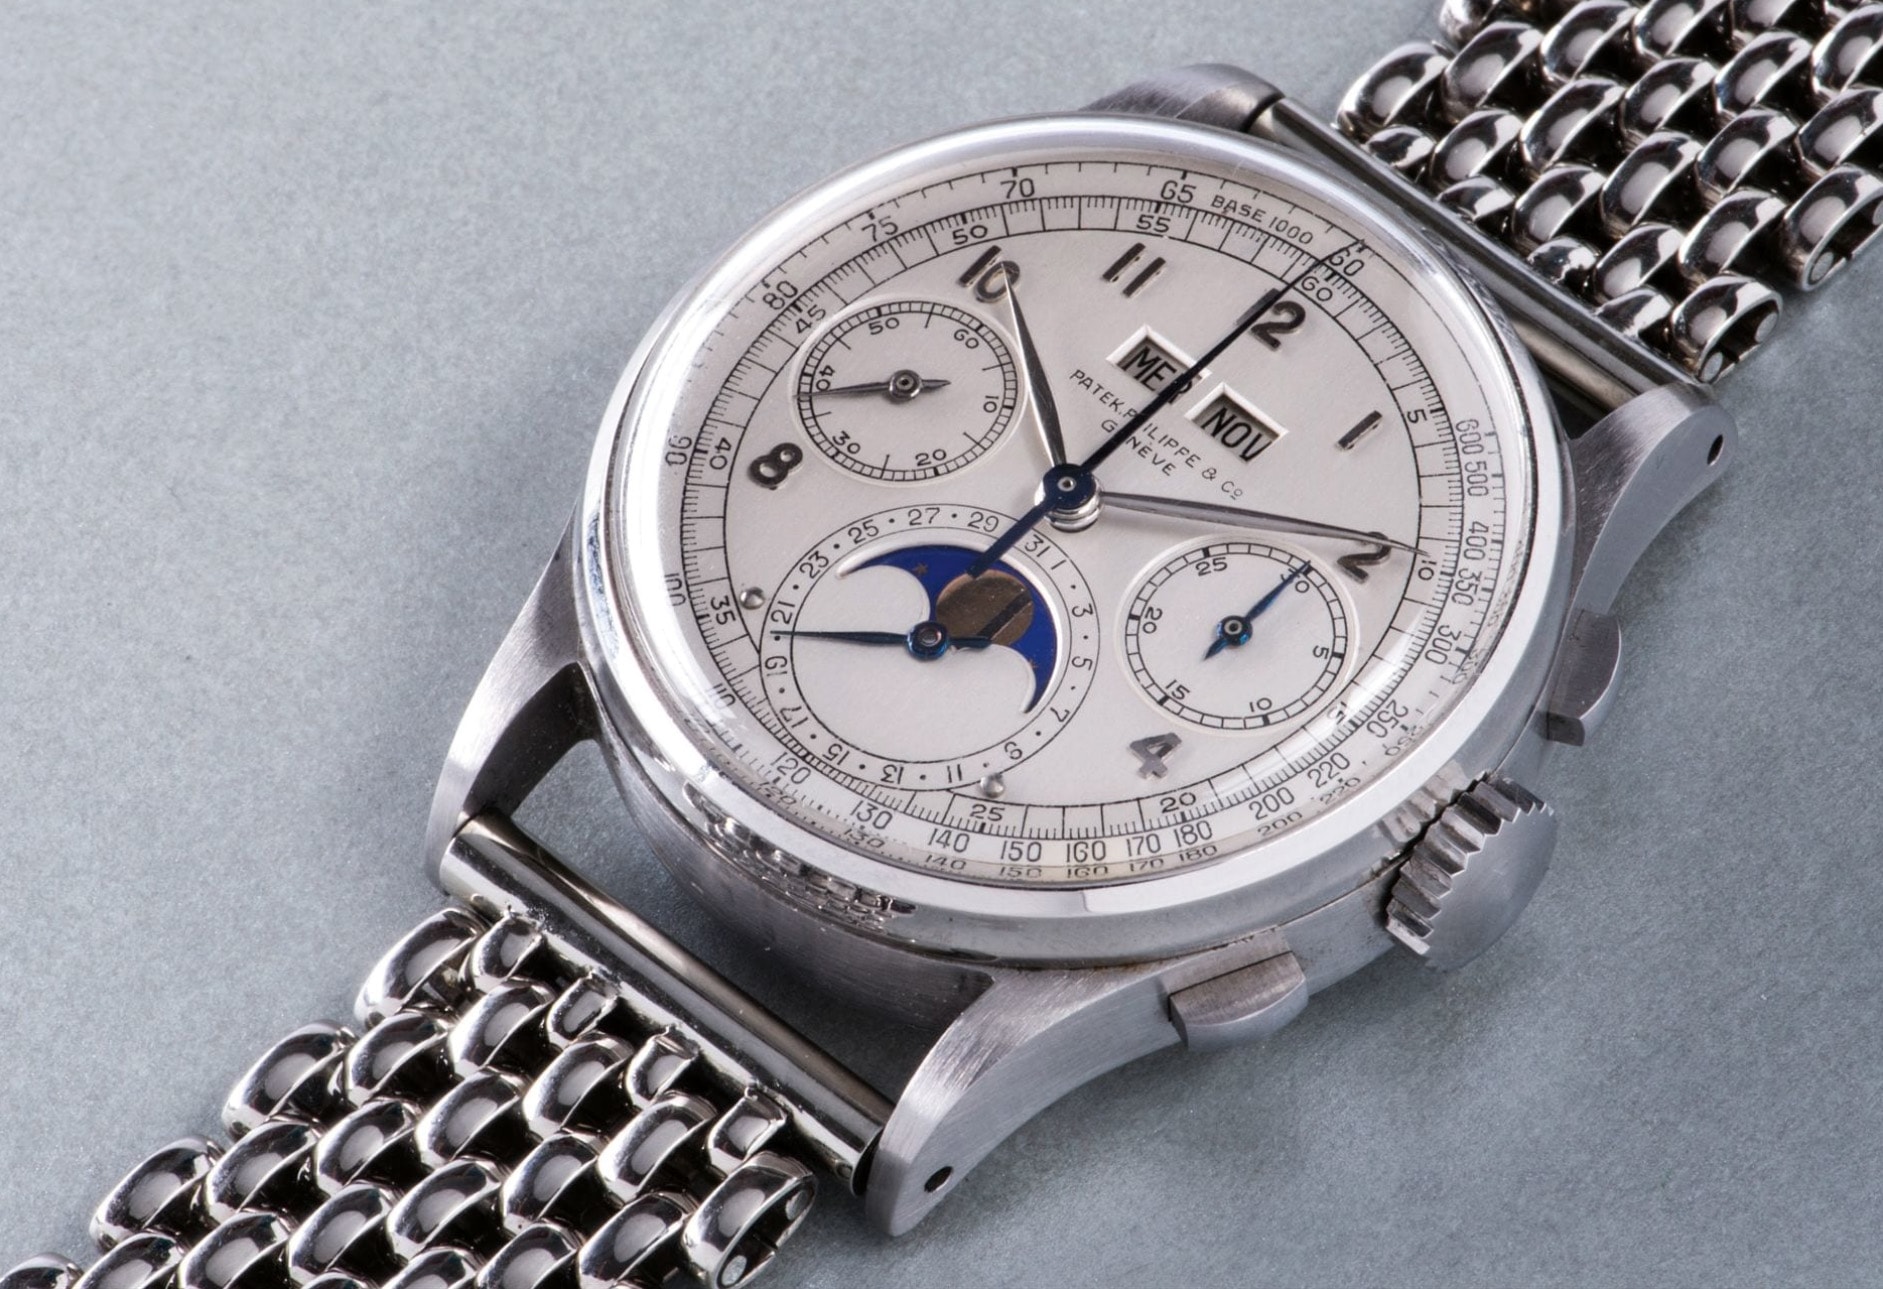 Patek Philippe brings back the 'holy grail' of watches for 170 lucky buyers